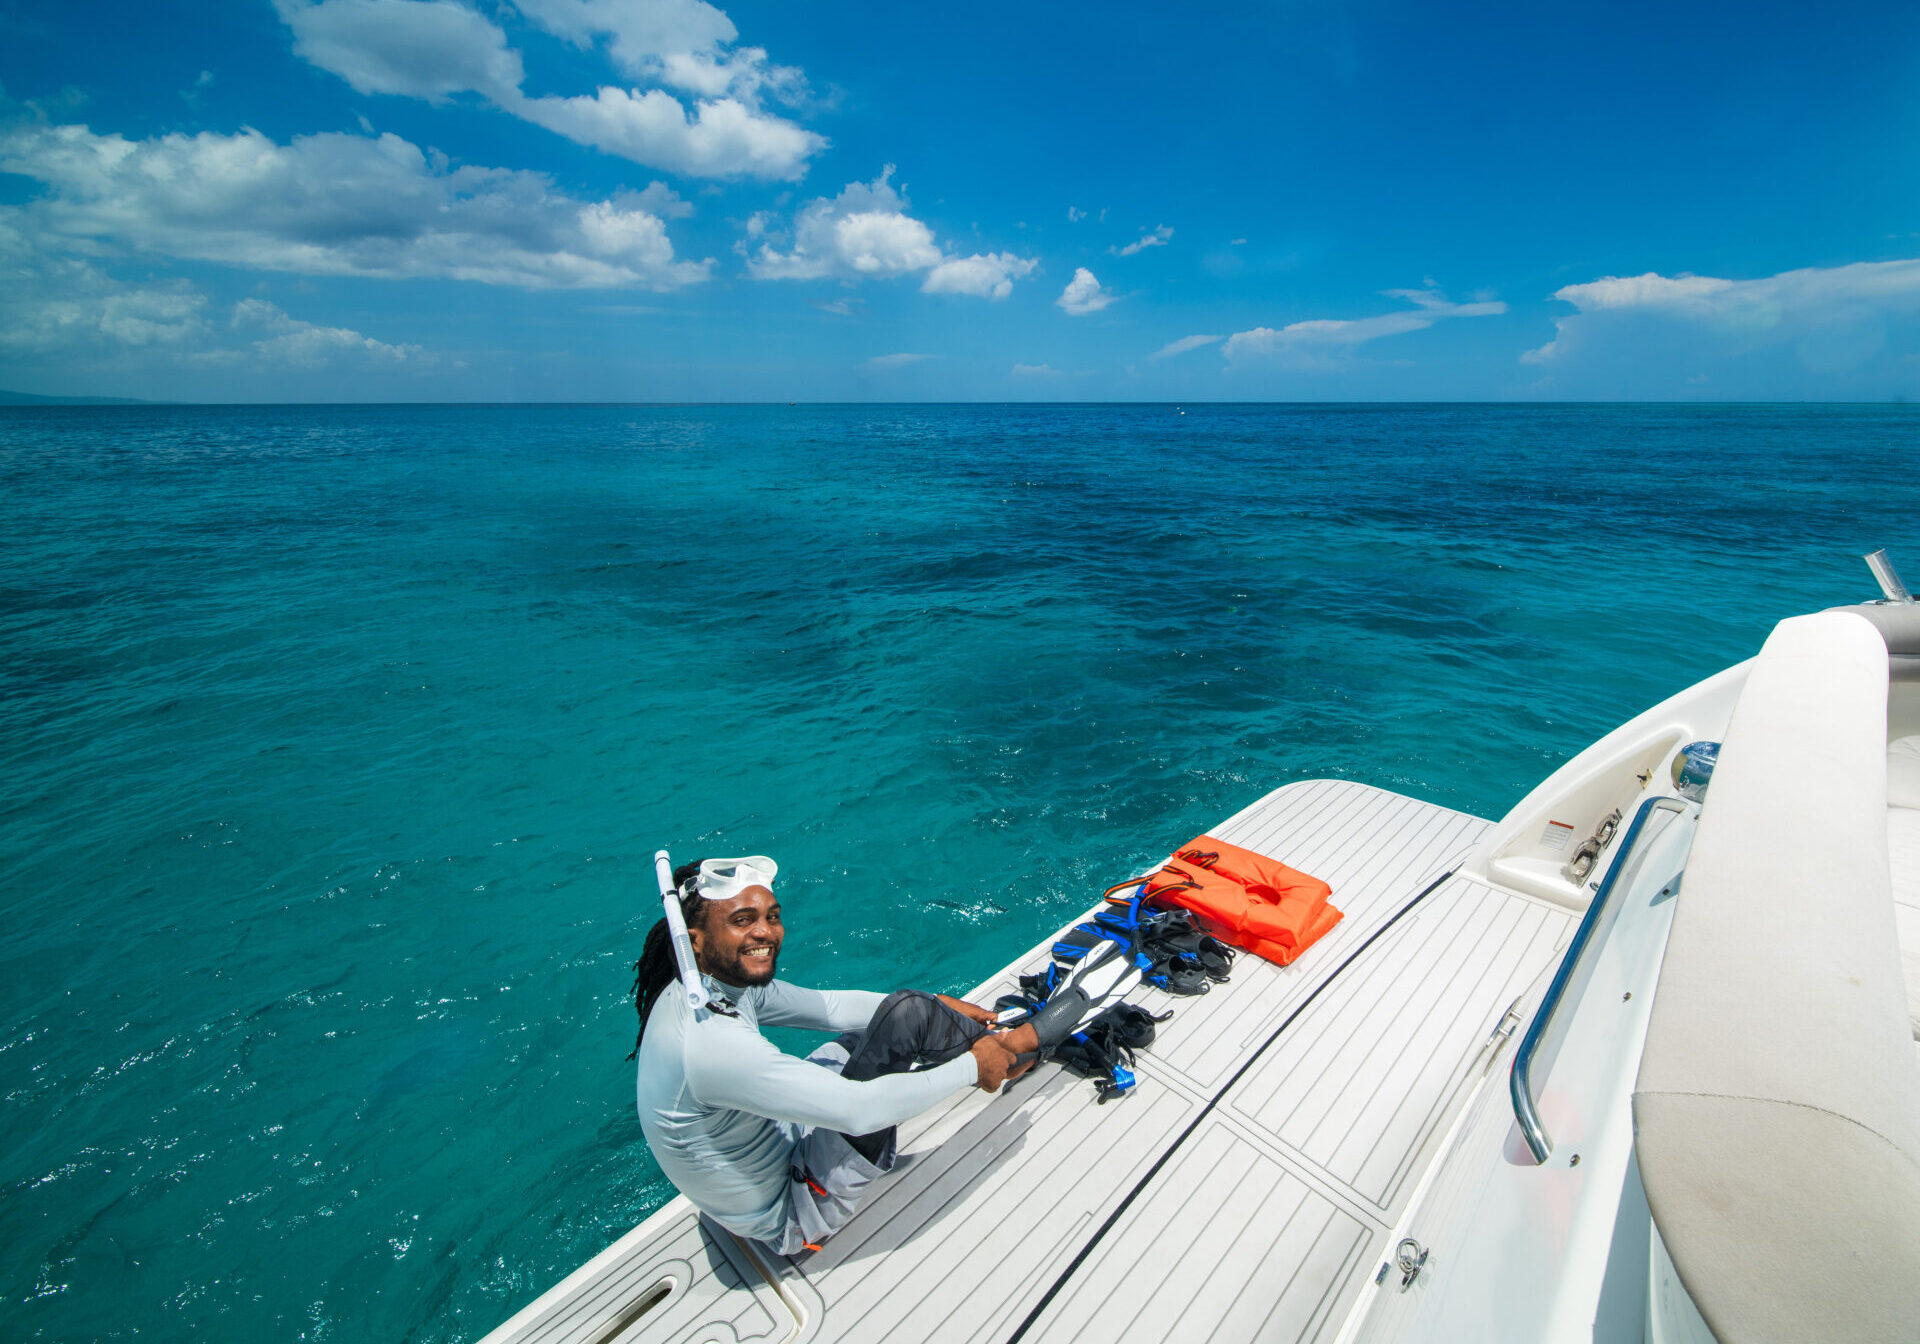 A man sitting on the side of a boat in the ocean.